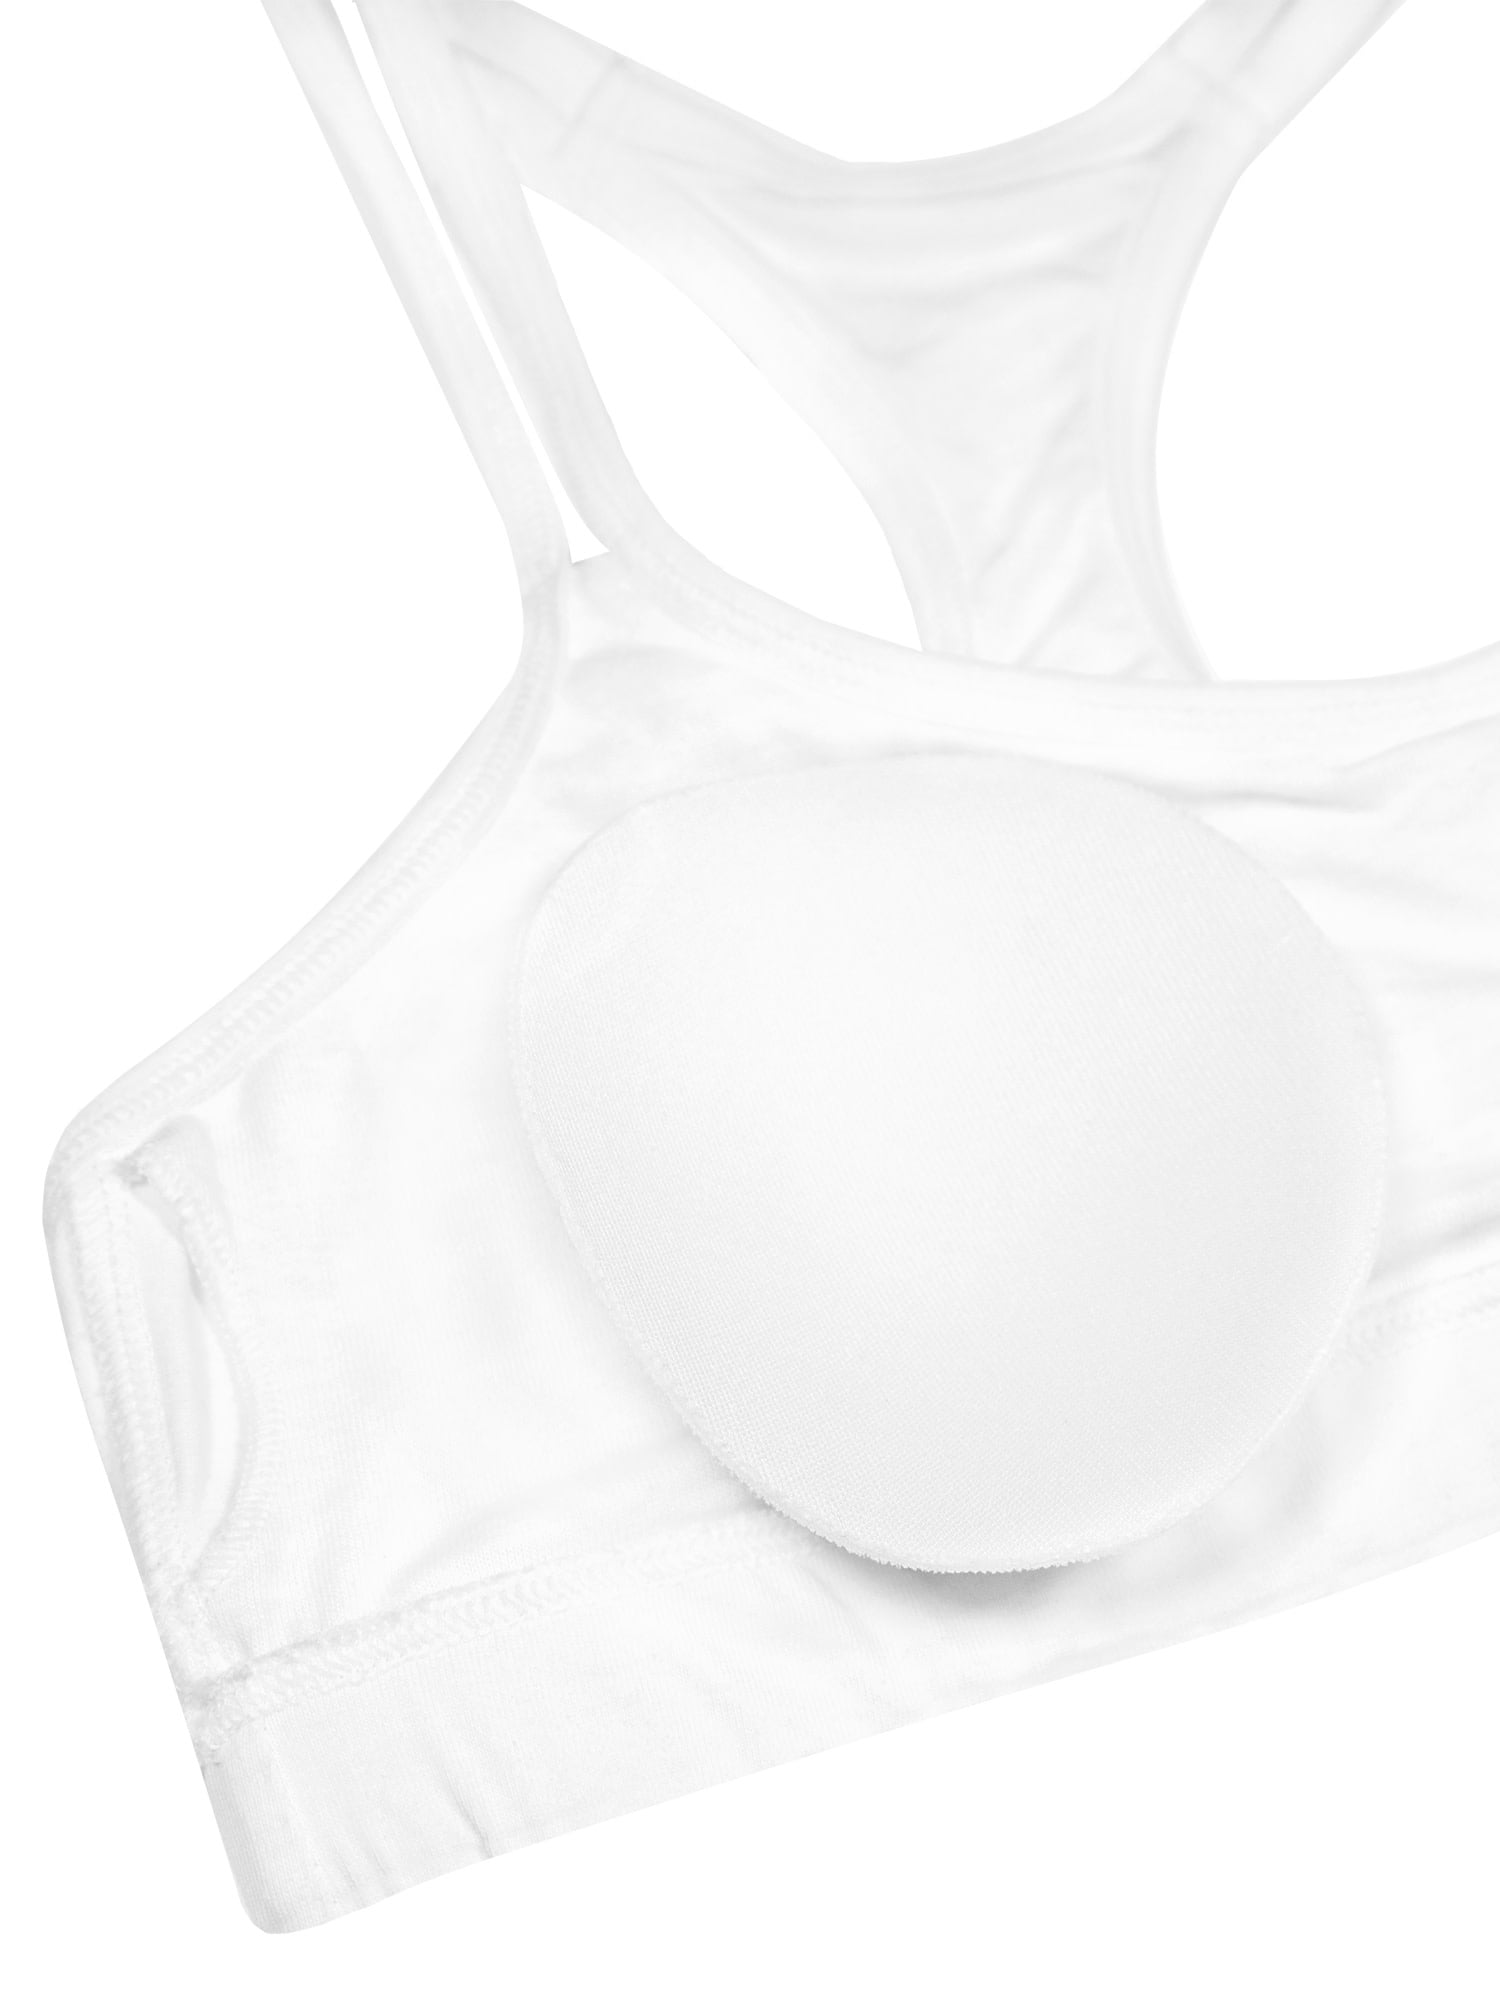 Fruit of the Loom Girls Pull Over Cotton Racerback Sports Bra 3